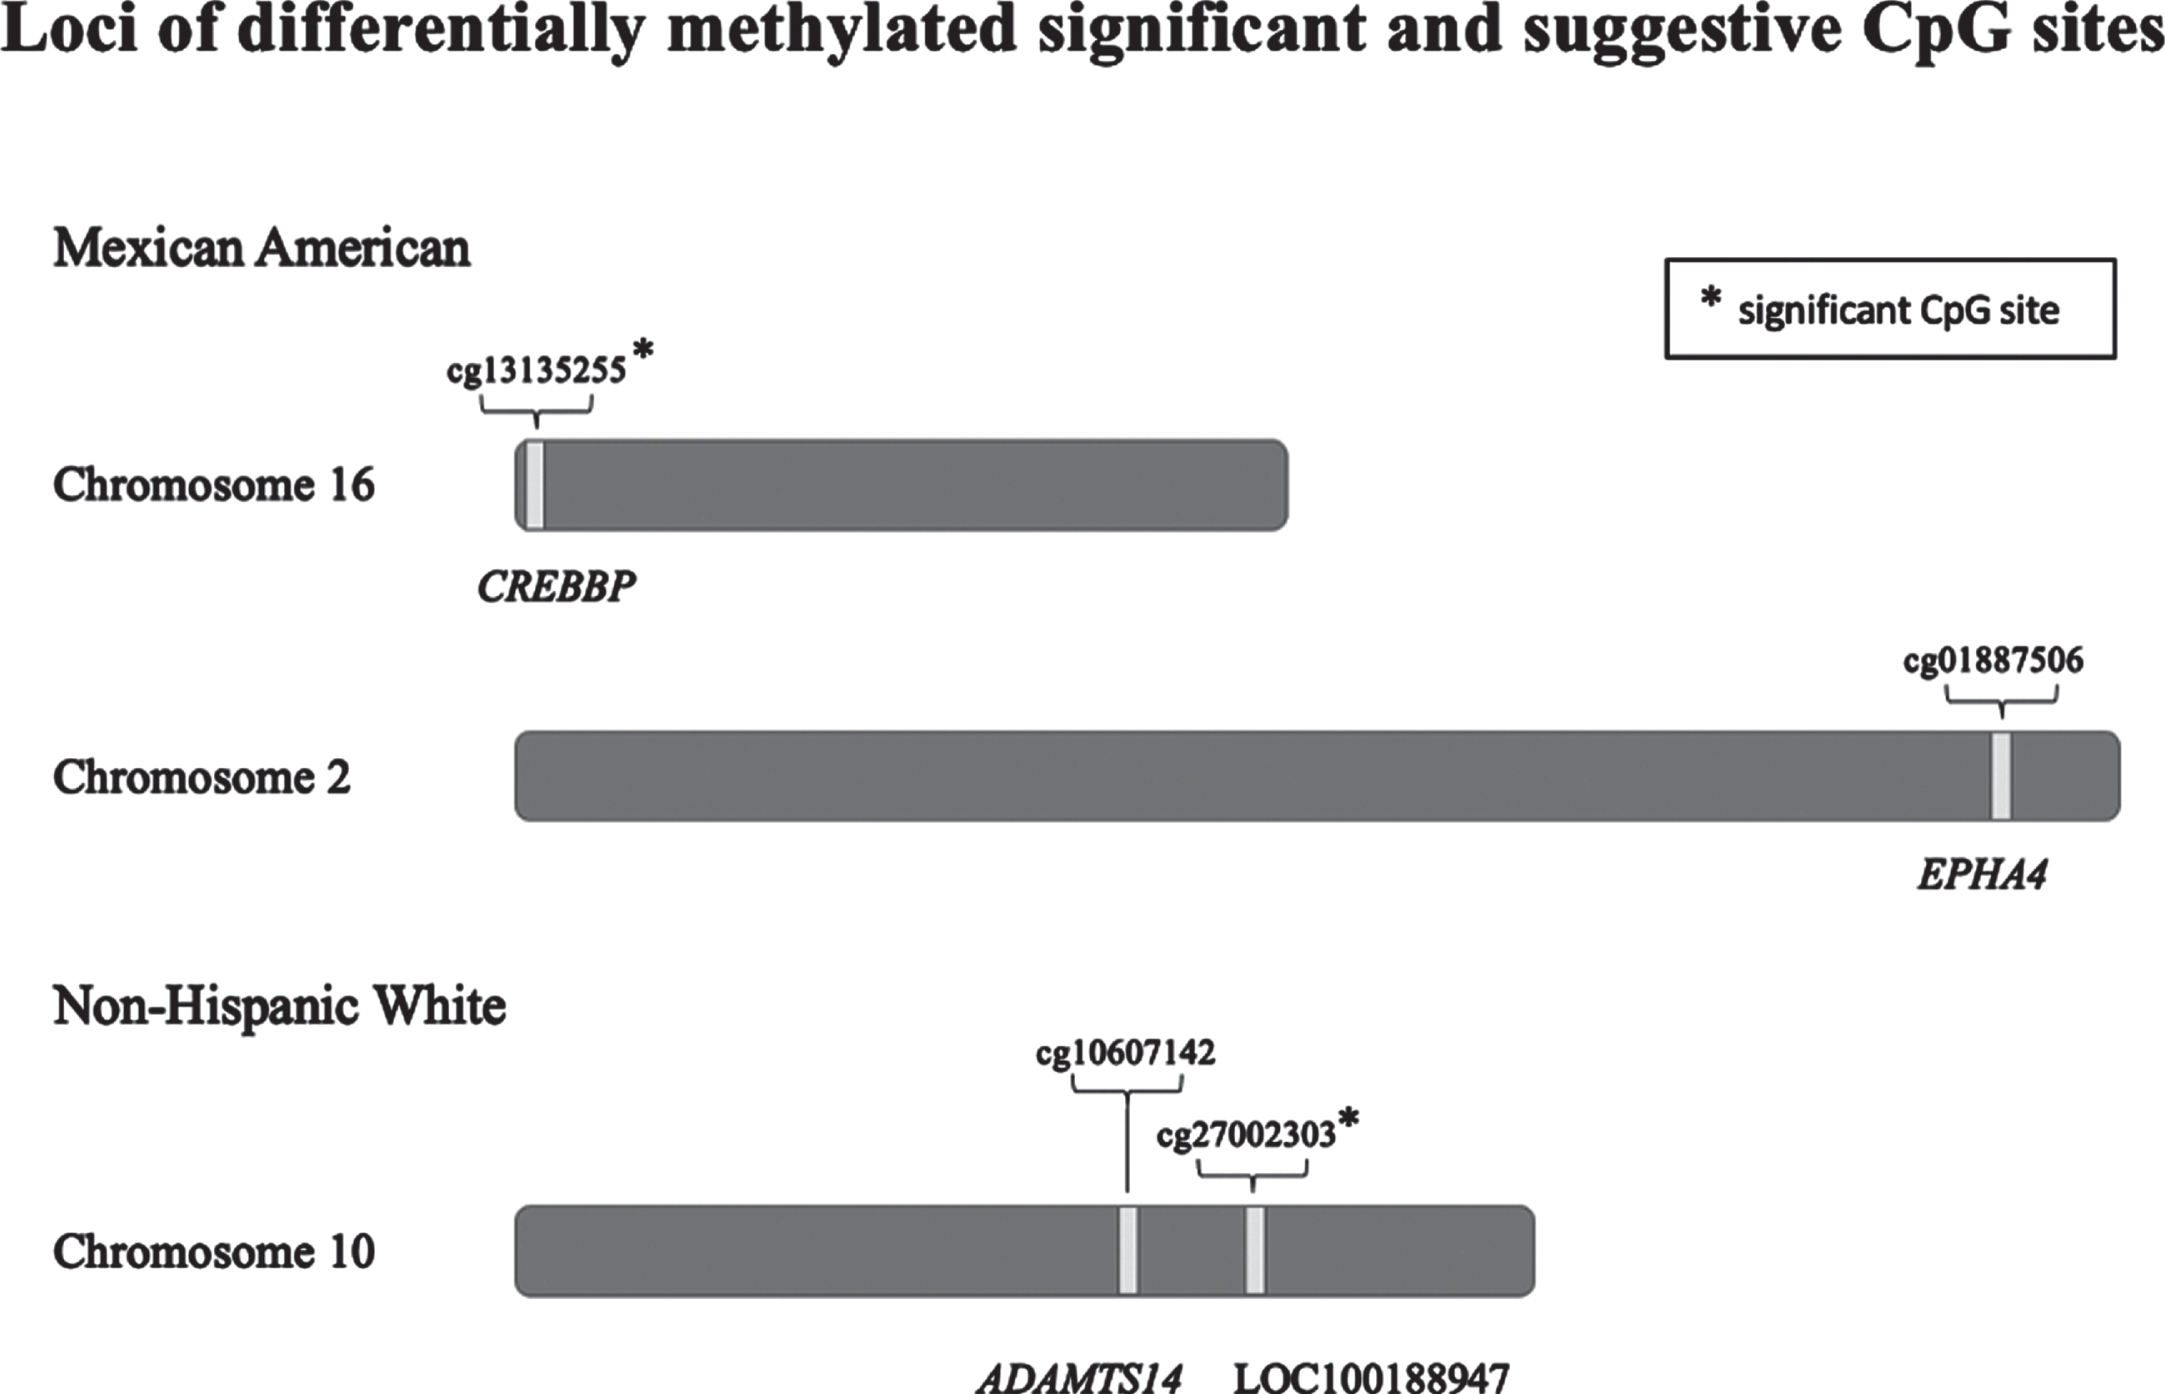 Loci of differentially methylated significant or suggestive CpG sites among Mexican American and non-Hispanic white TARCC participants (site of gene/loci derived from UCSC genome browser [47]).